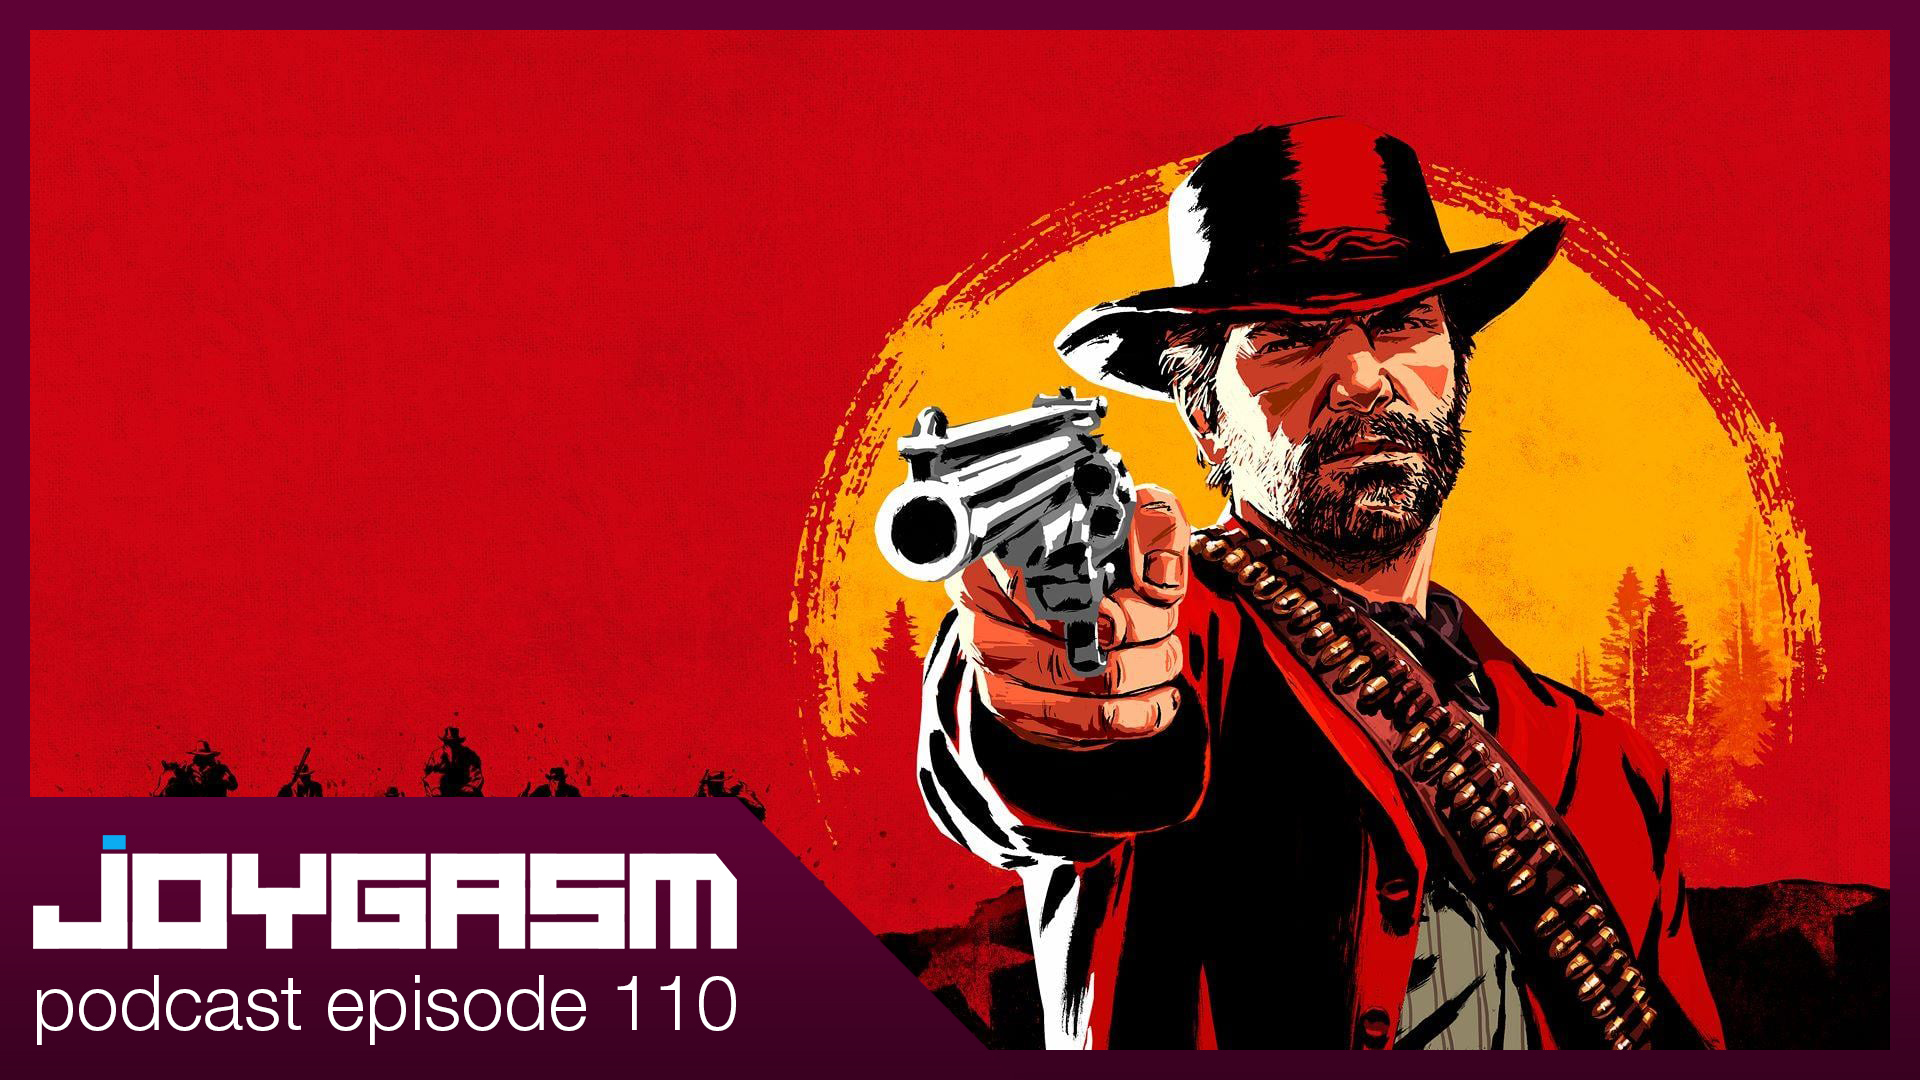 Ep. 110: Red Dead Redemption 2 Spoilercast Review